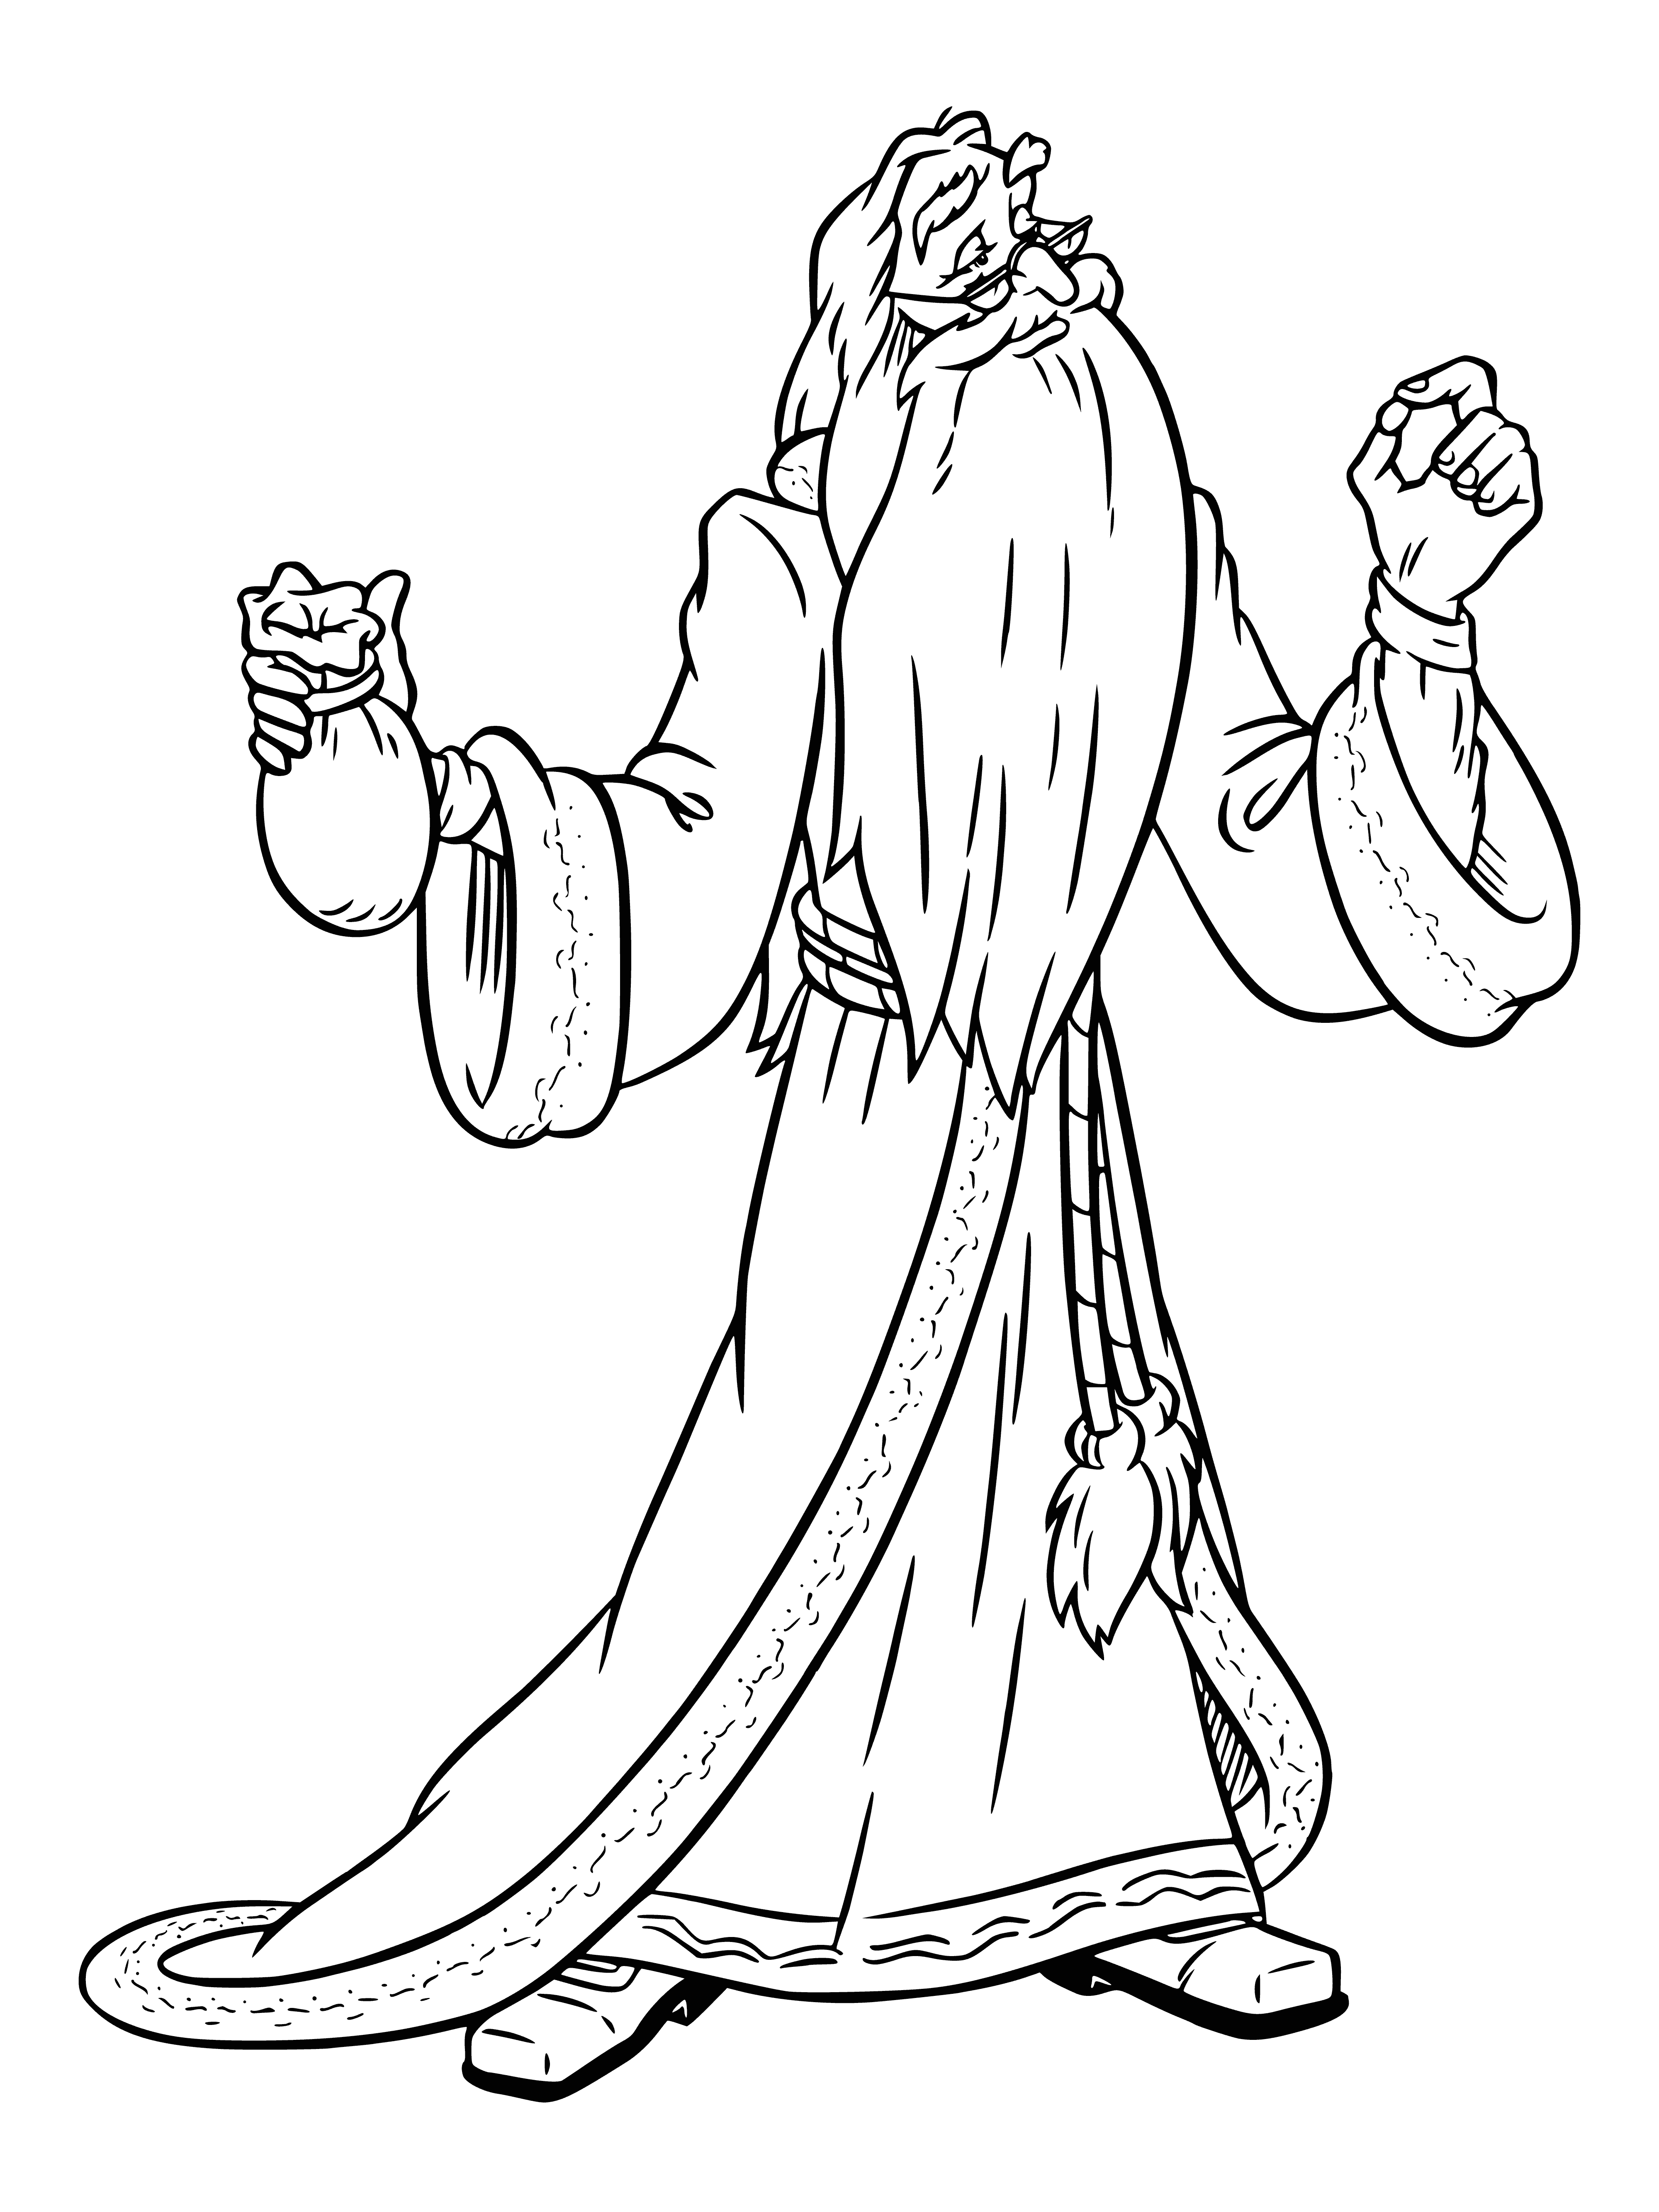 coloring page: An elderly wizard in black robes holds a wand in his hand, a small black cap on his head and half-moon glasses rest on his long silver beard.